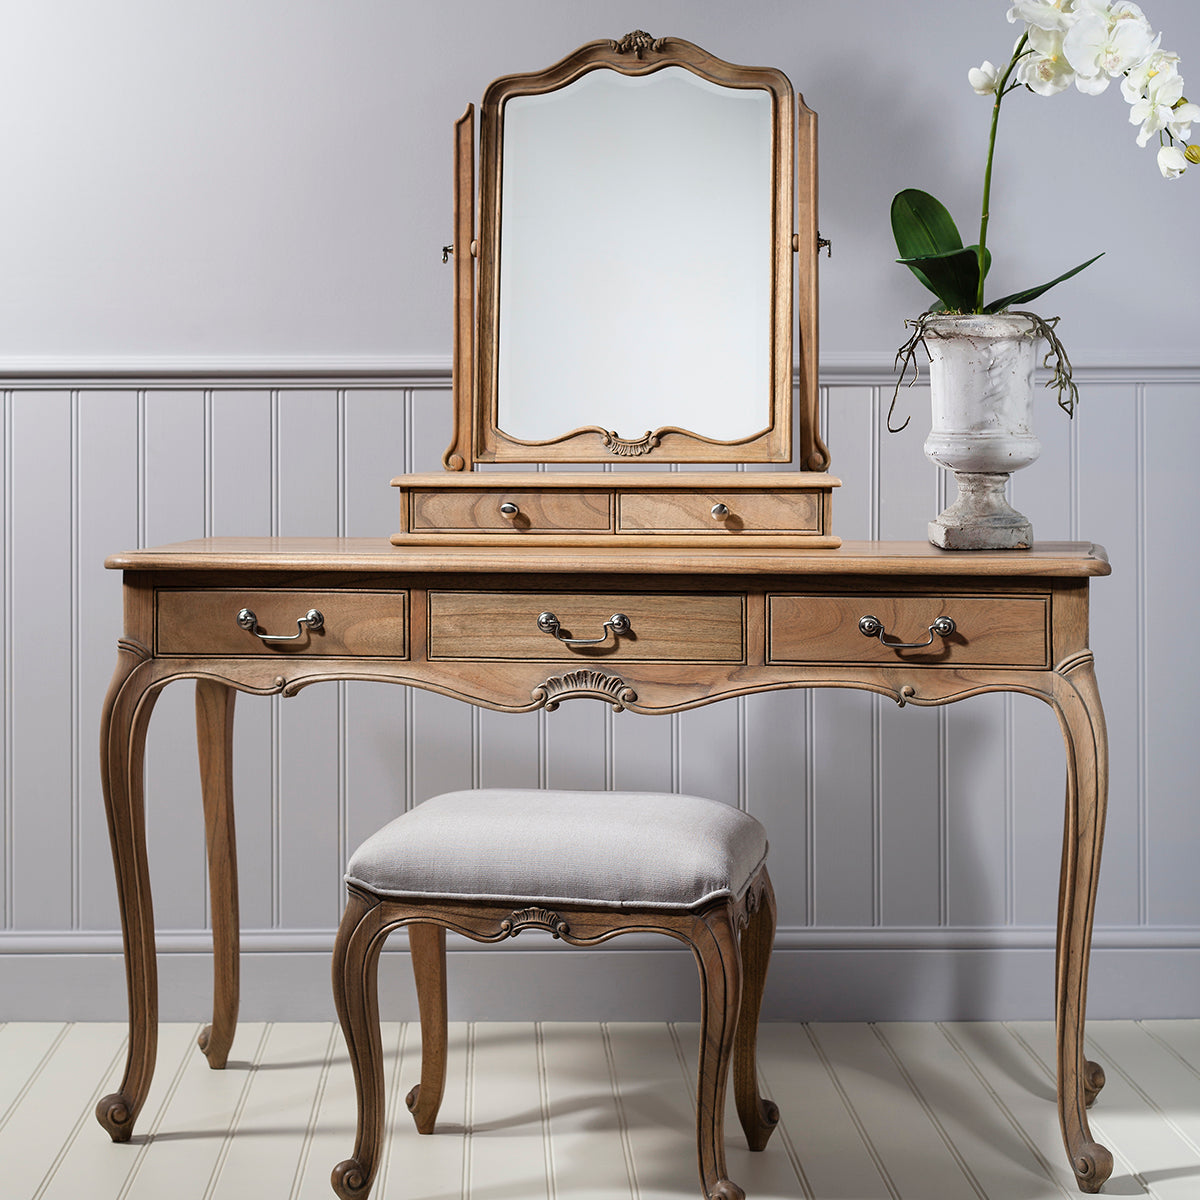 An ornate Holne Dressing Table and mirror with a weathered finish, sold by Kikiathome.co.uk.